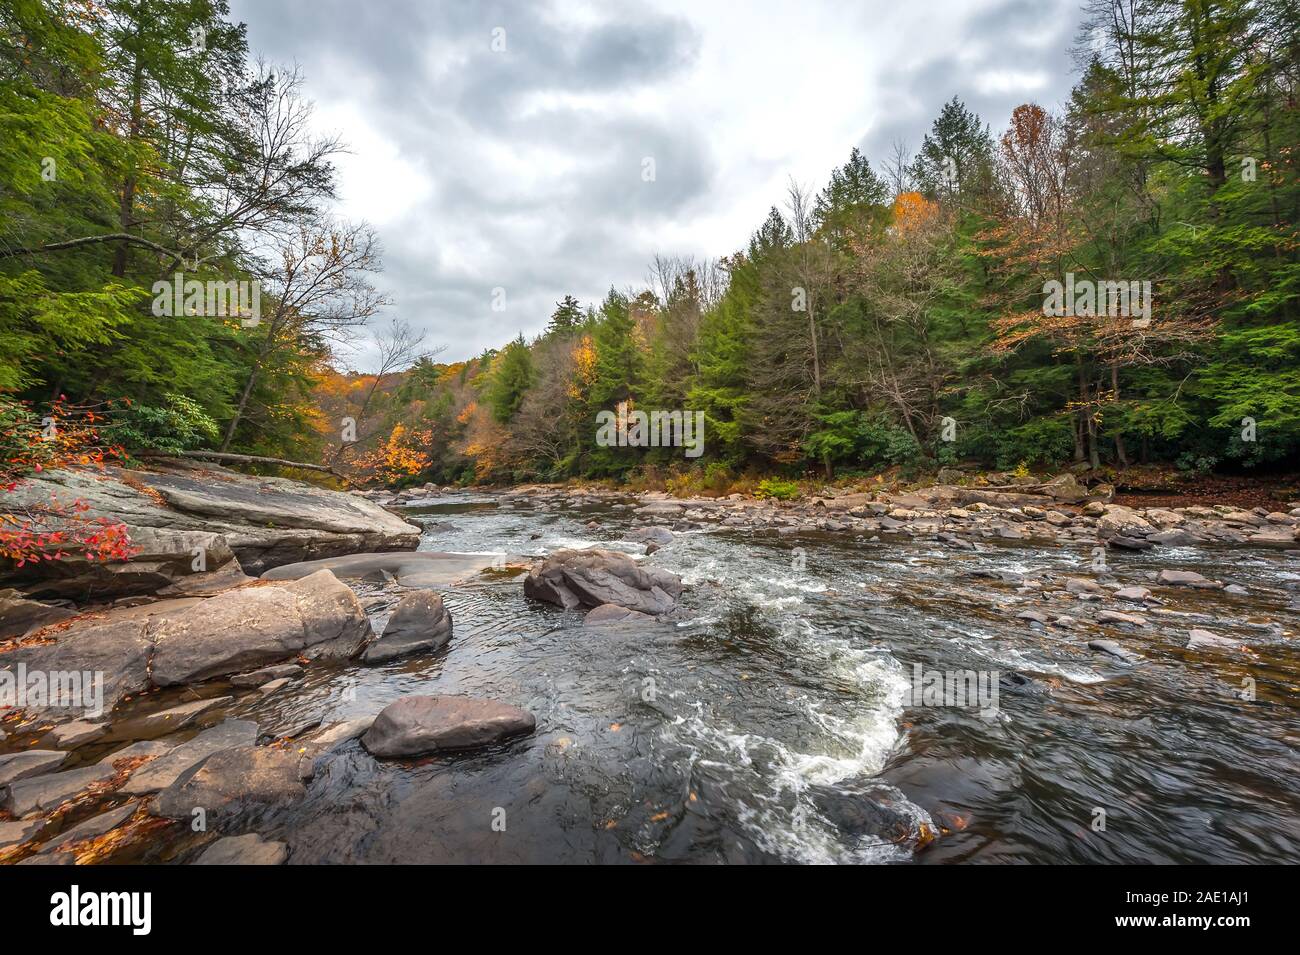 Autumn colors abound along a wild river with rapids in the Appalachian mountains Stock Photo